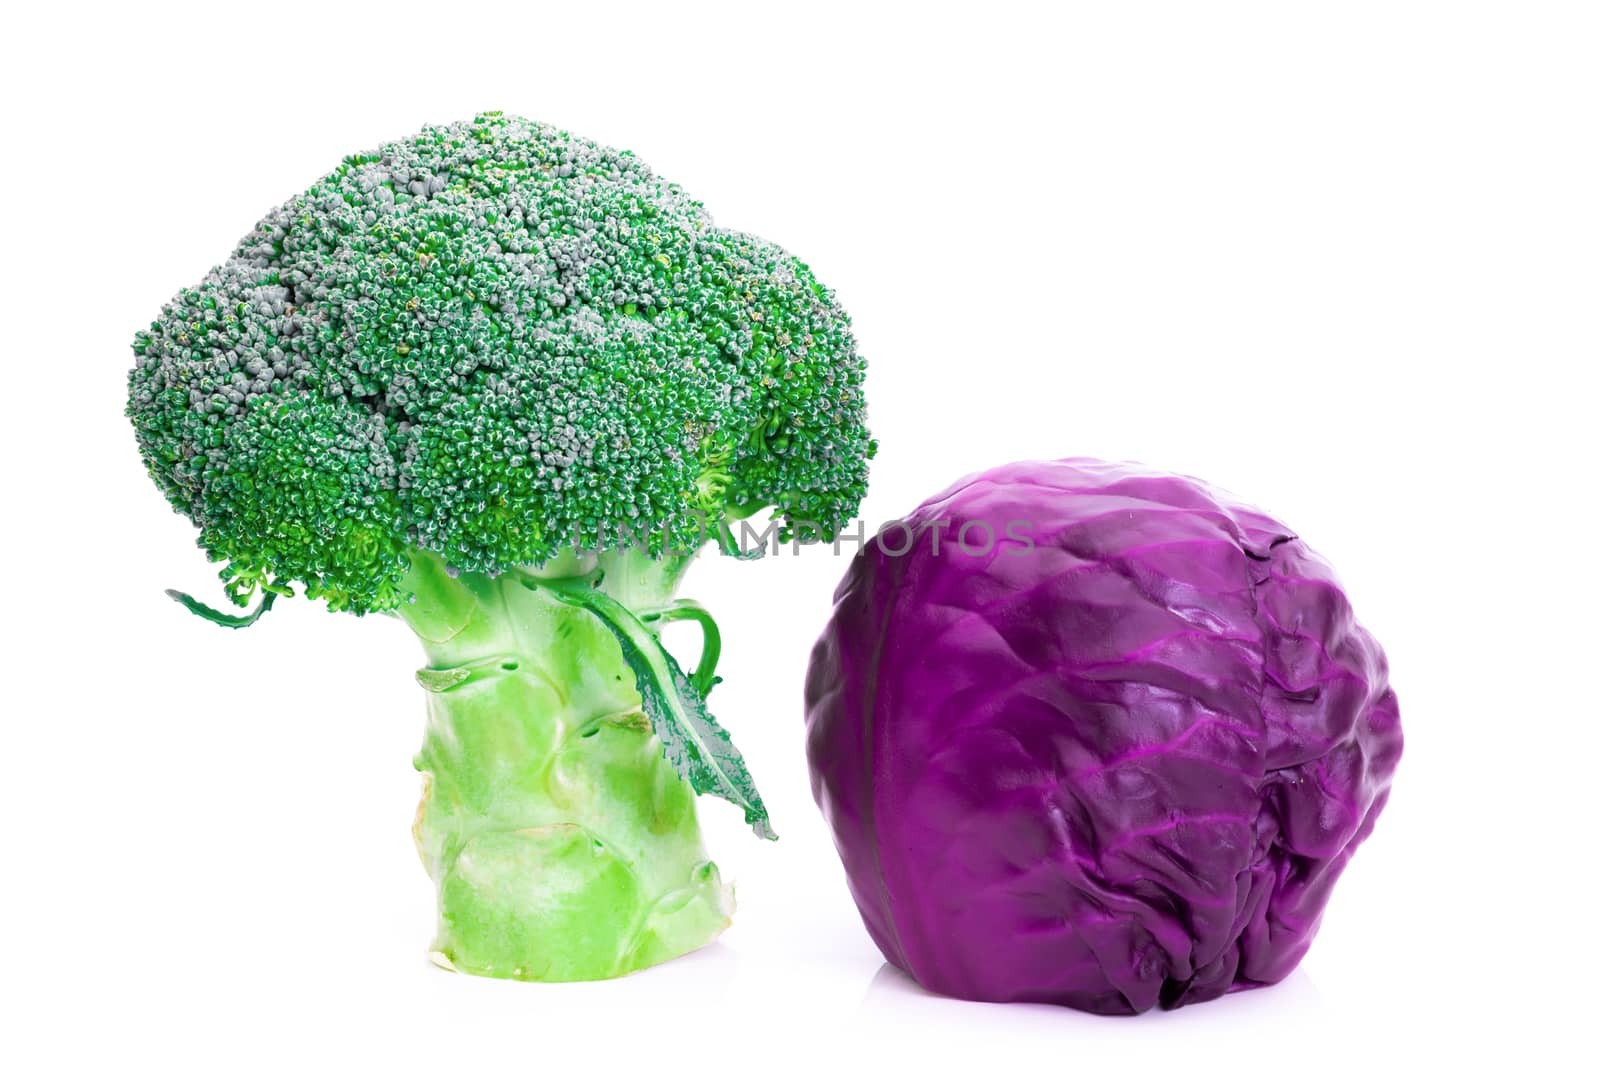 Broccoli and Red cabbage on a white background